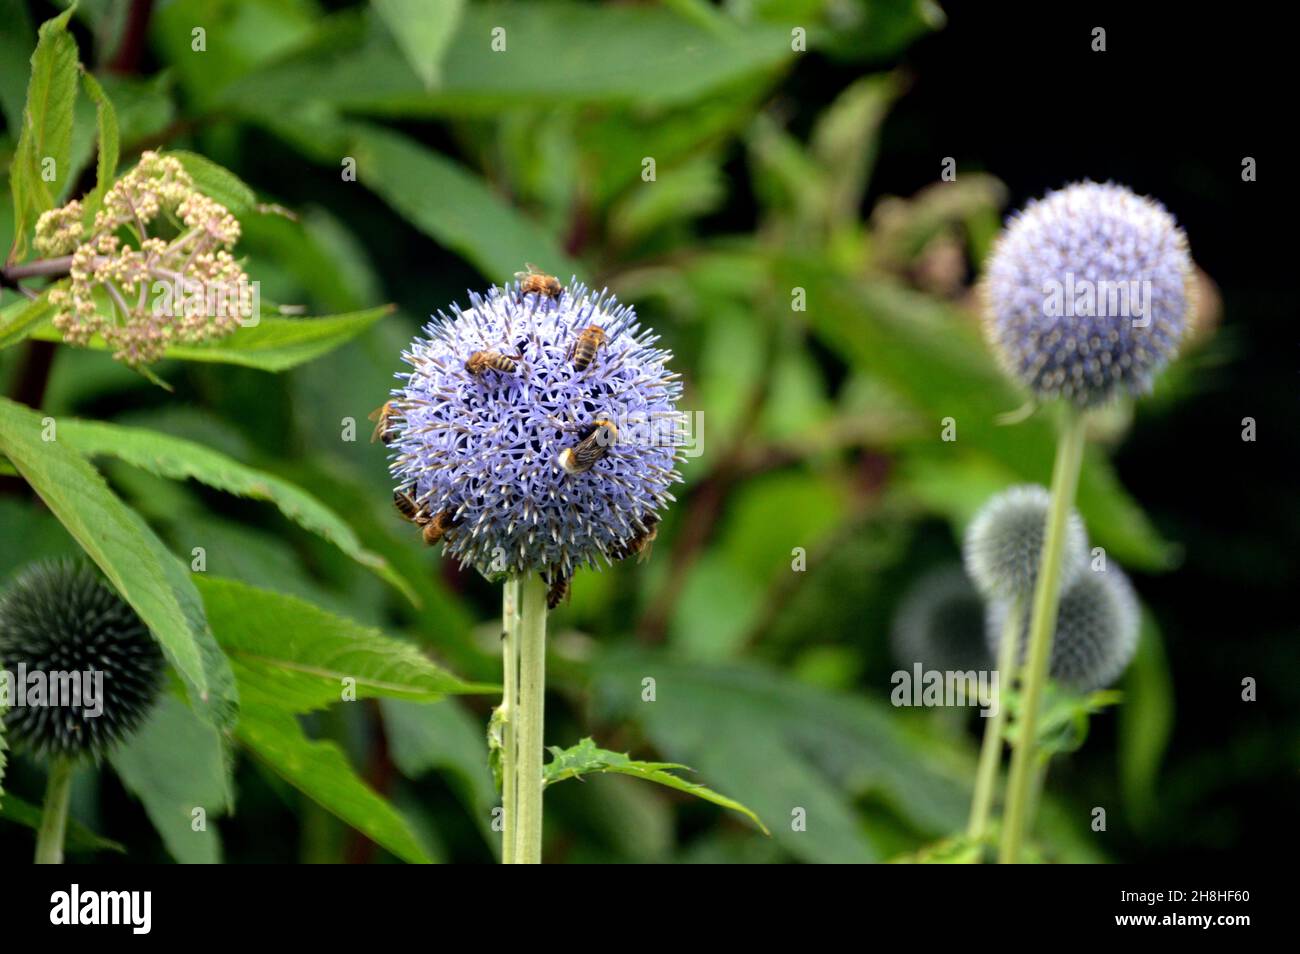 Bees on Spherical blue-grey Echinops Bannaticus (Blue Globe Thistle) Flowerheads in the Borders at Newby Hall & Gardens, Ripon, North Yorkshire, UK. Stock Photo